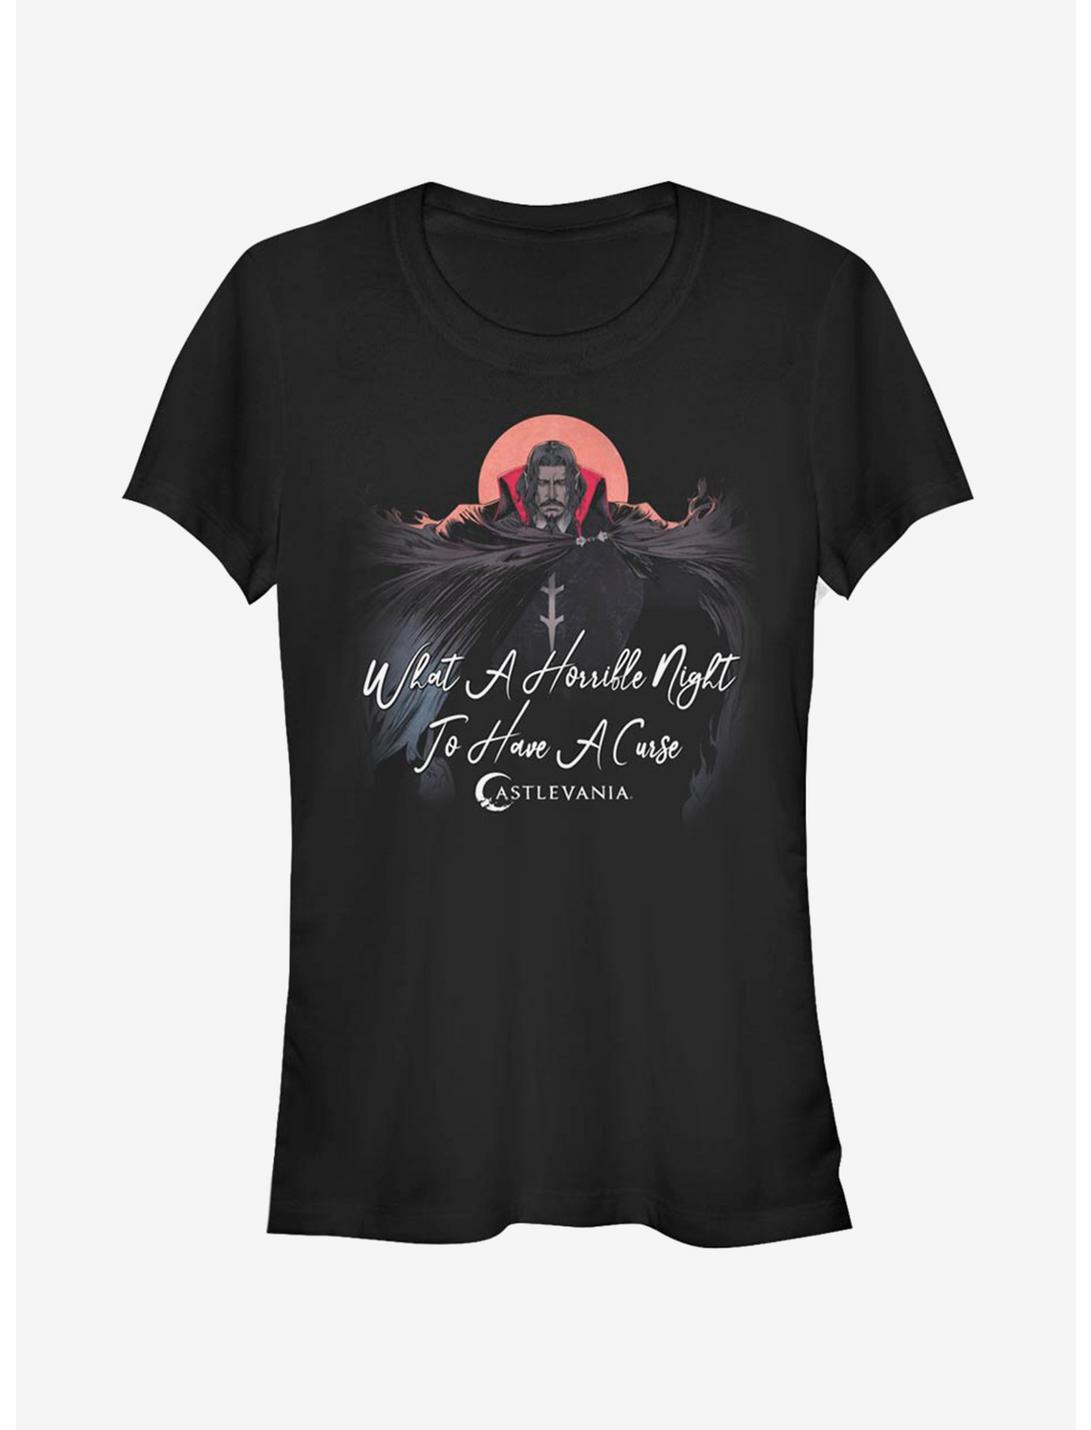 Castlevania Horrible Night To Have A Curse Girls T-Shirt, BLACK, hi-res